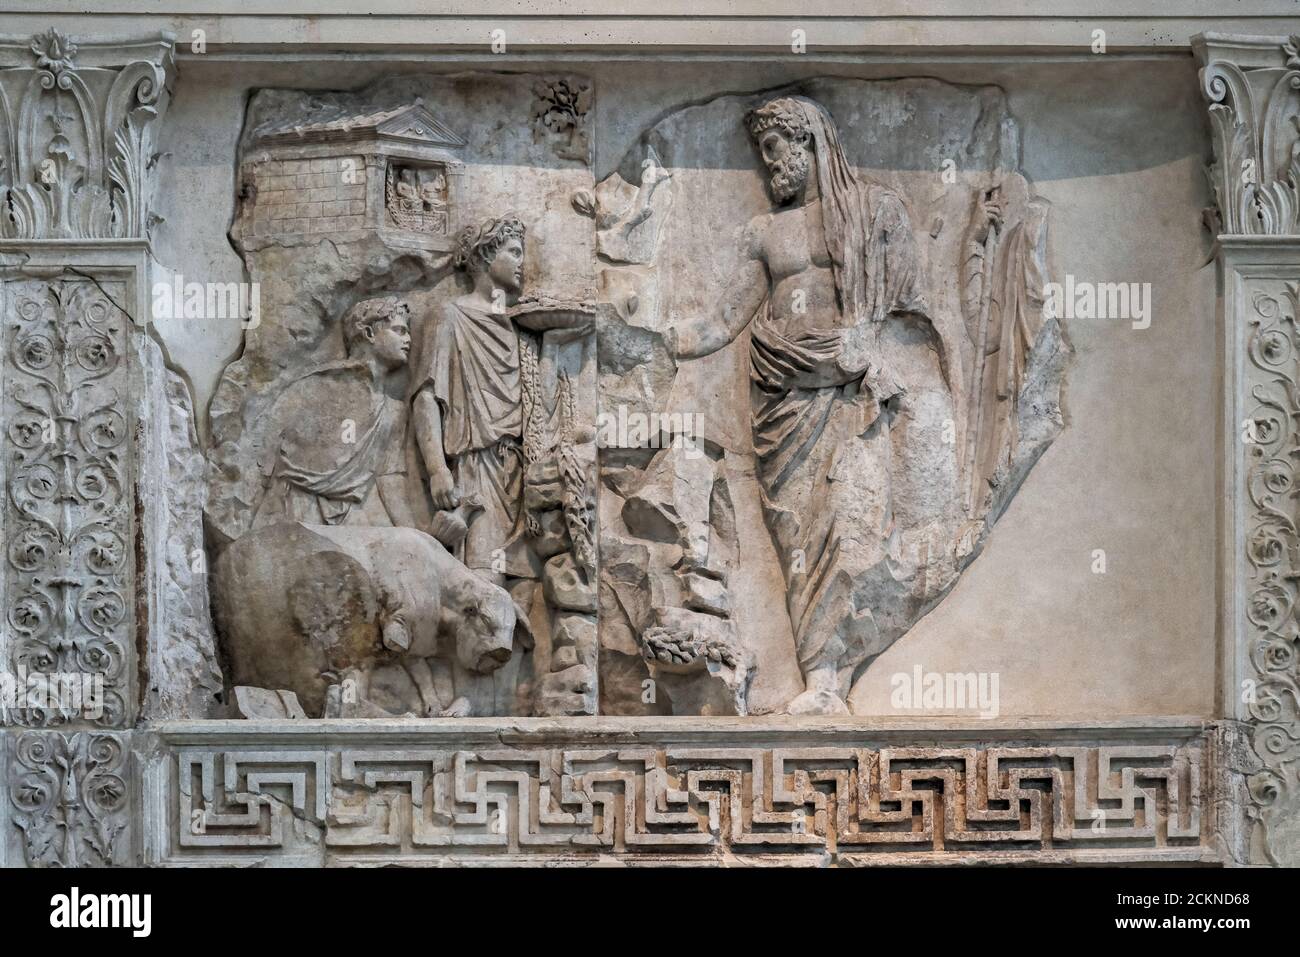 Relief showing a sacrifice performed by Aeneas, Ara Pacis Altar of Augustan Museum of Ara Pacis, Rome, Stock - Alamy